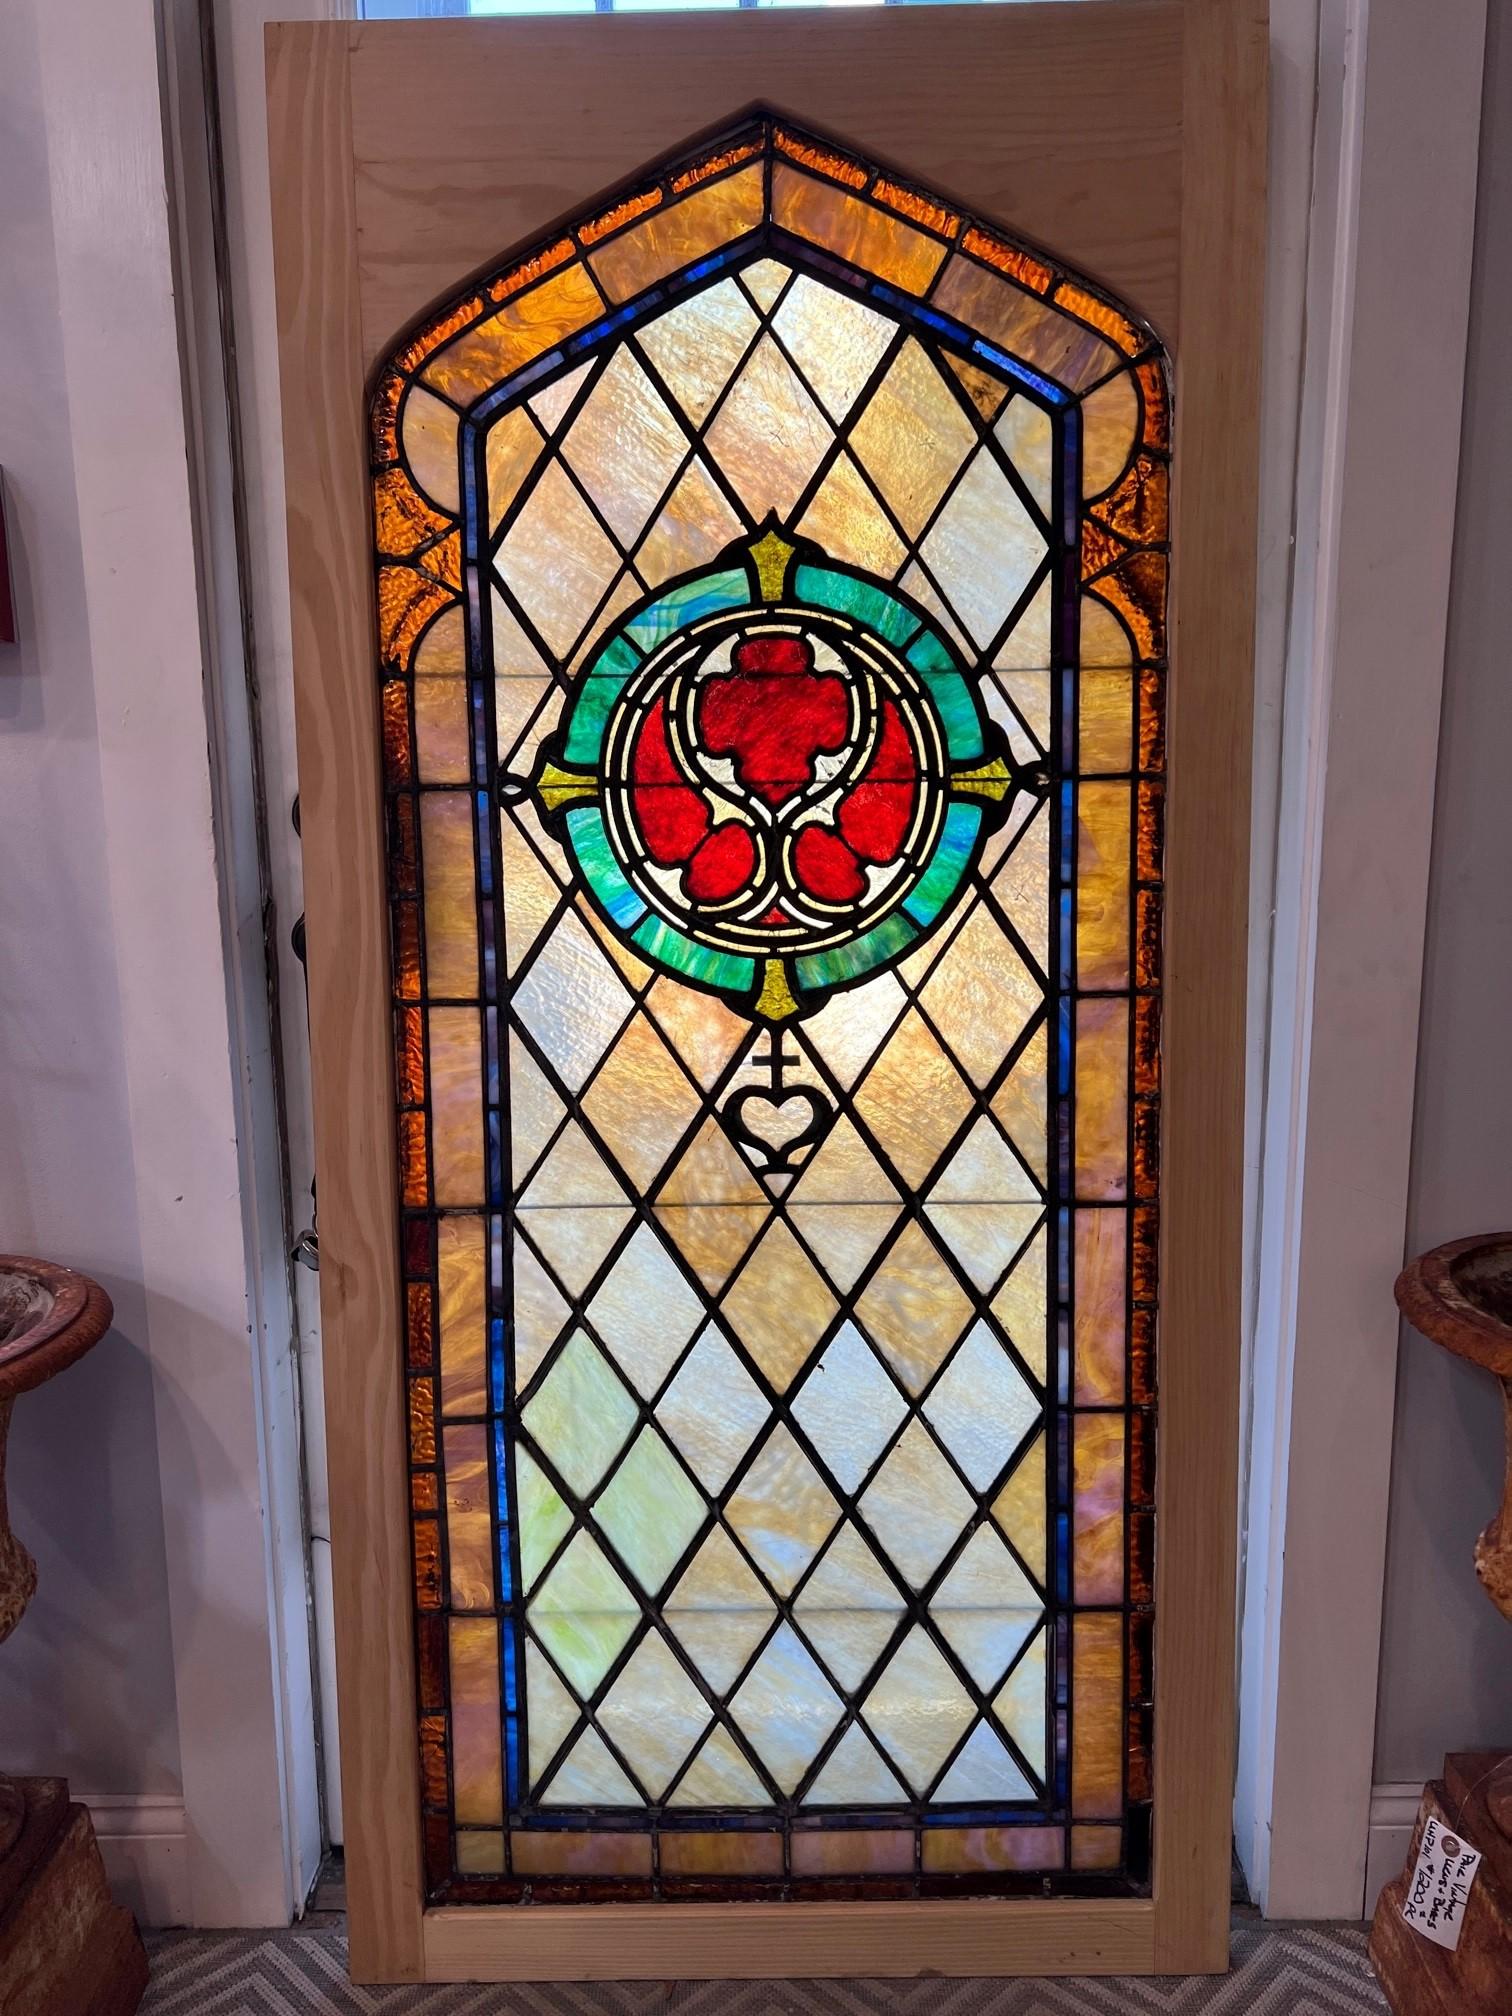 Early 20th century leaded stained glass window in a new wood frame. This is a great window with a deep red center which is beautiful in the sunlight. The window has a couple of small cracks shown in the photos but is in very good condition and